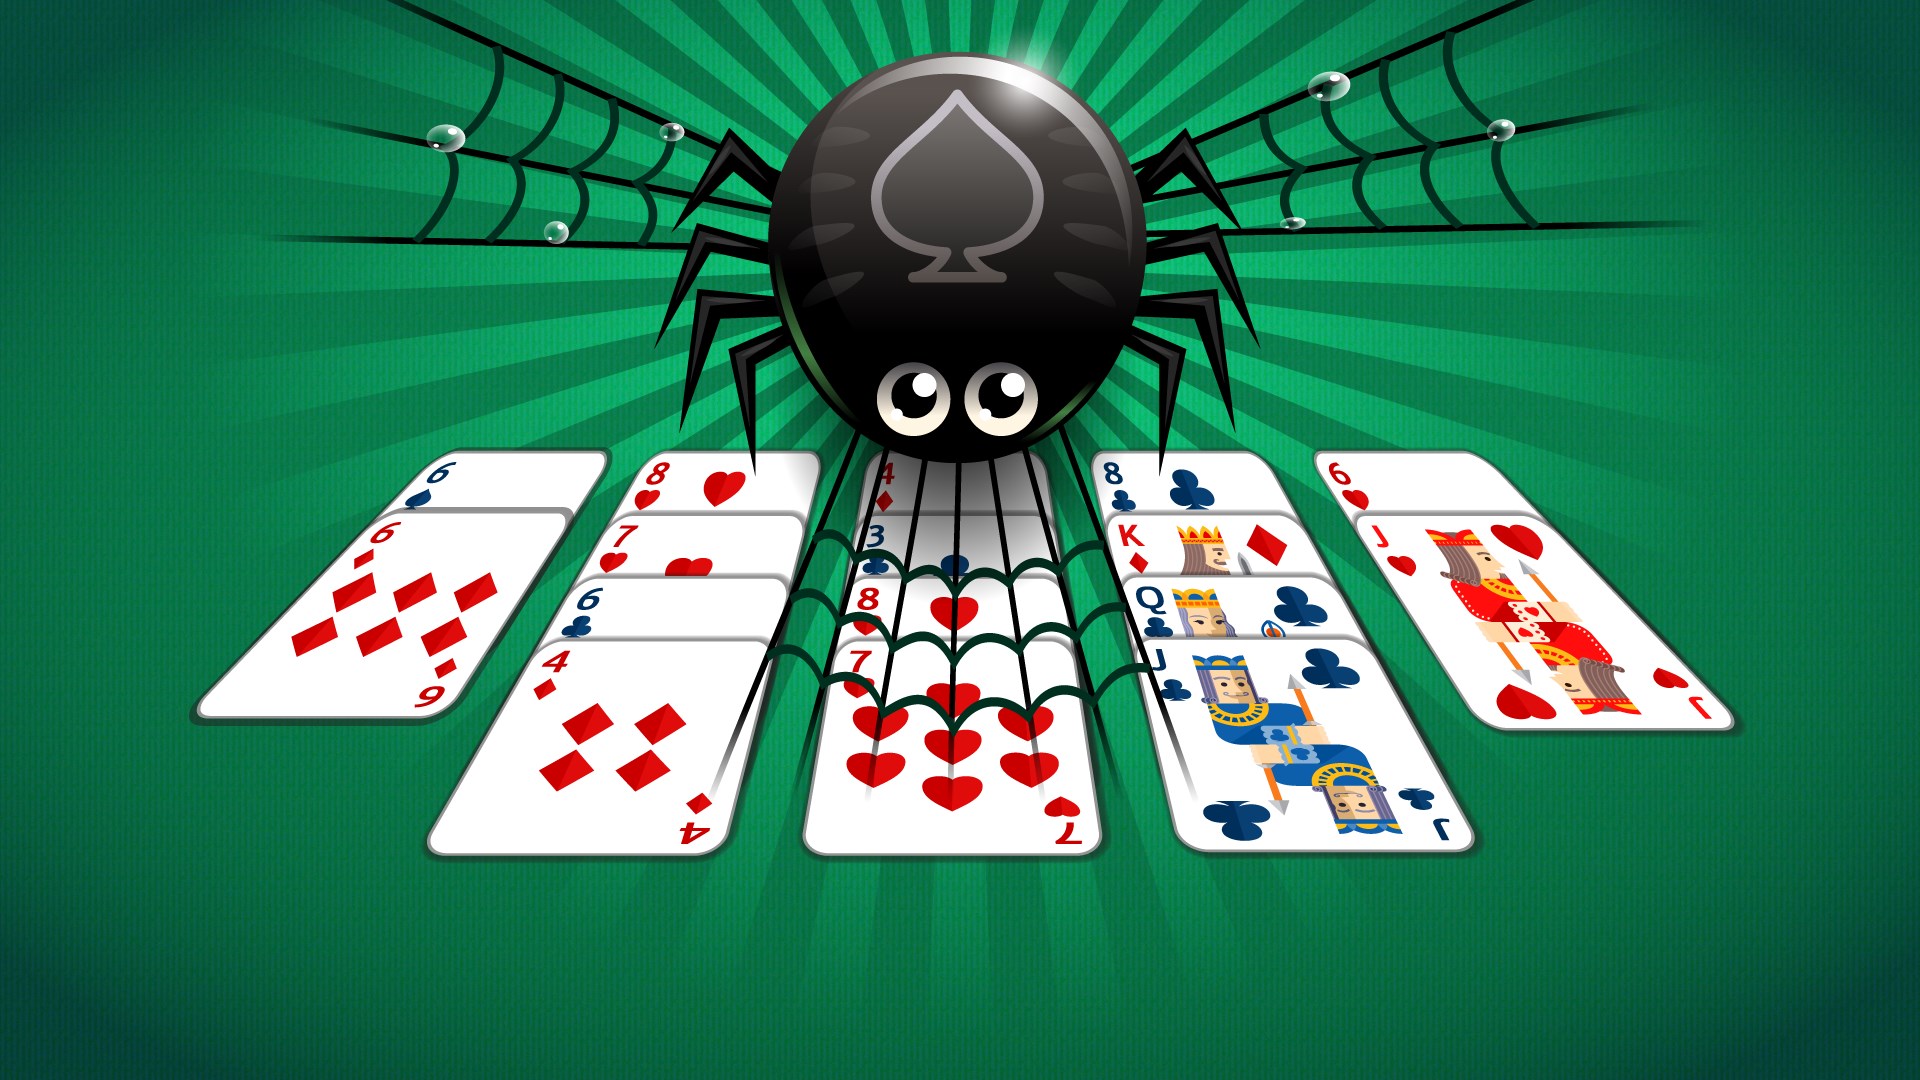 spider solitaire free download for windows 10